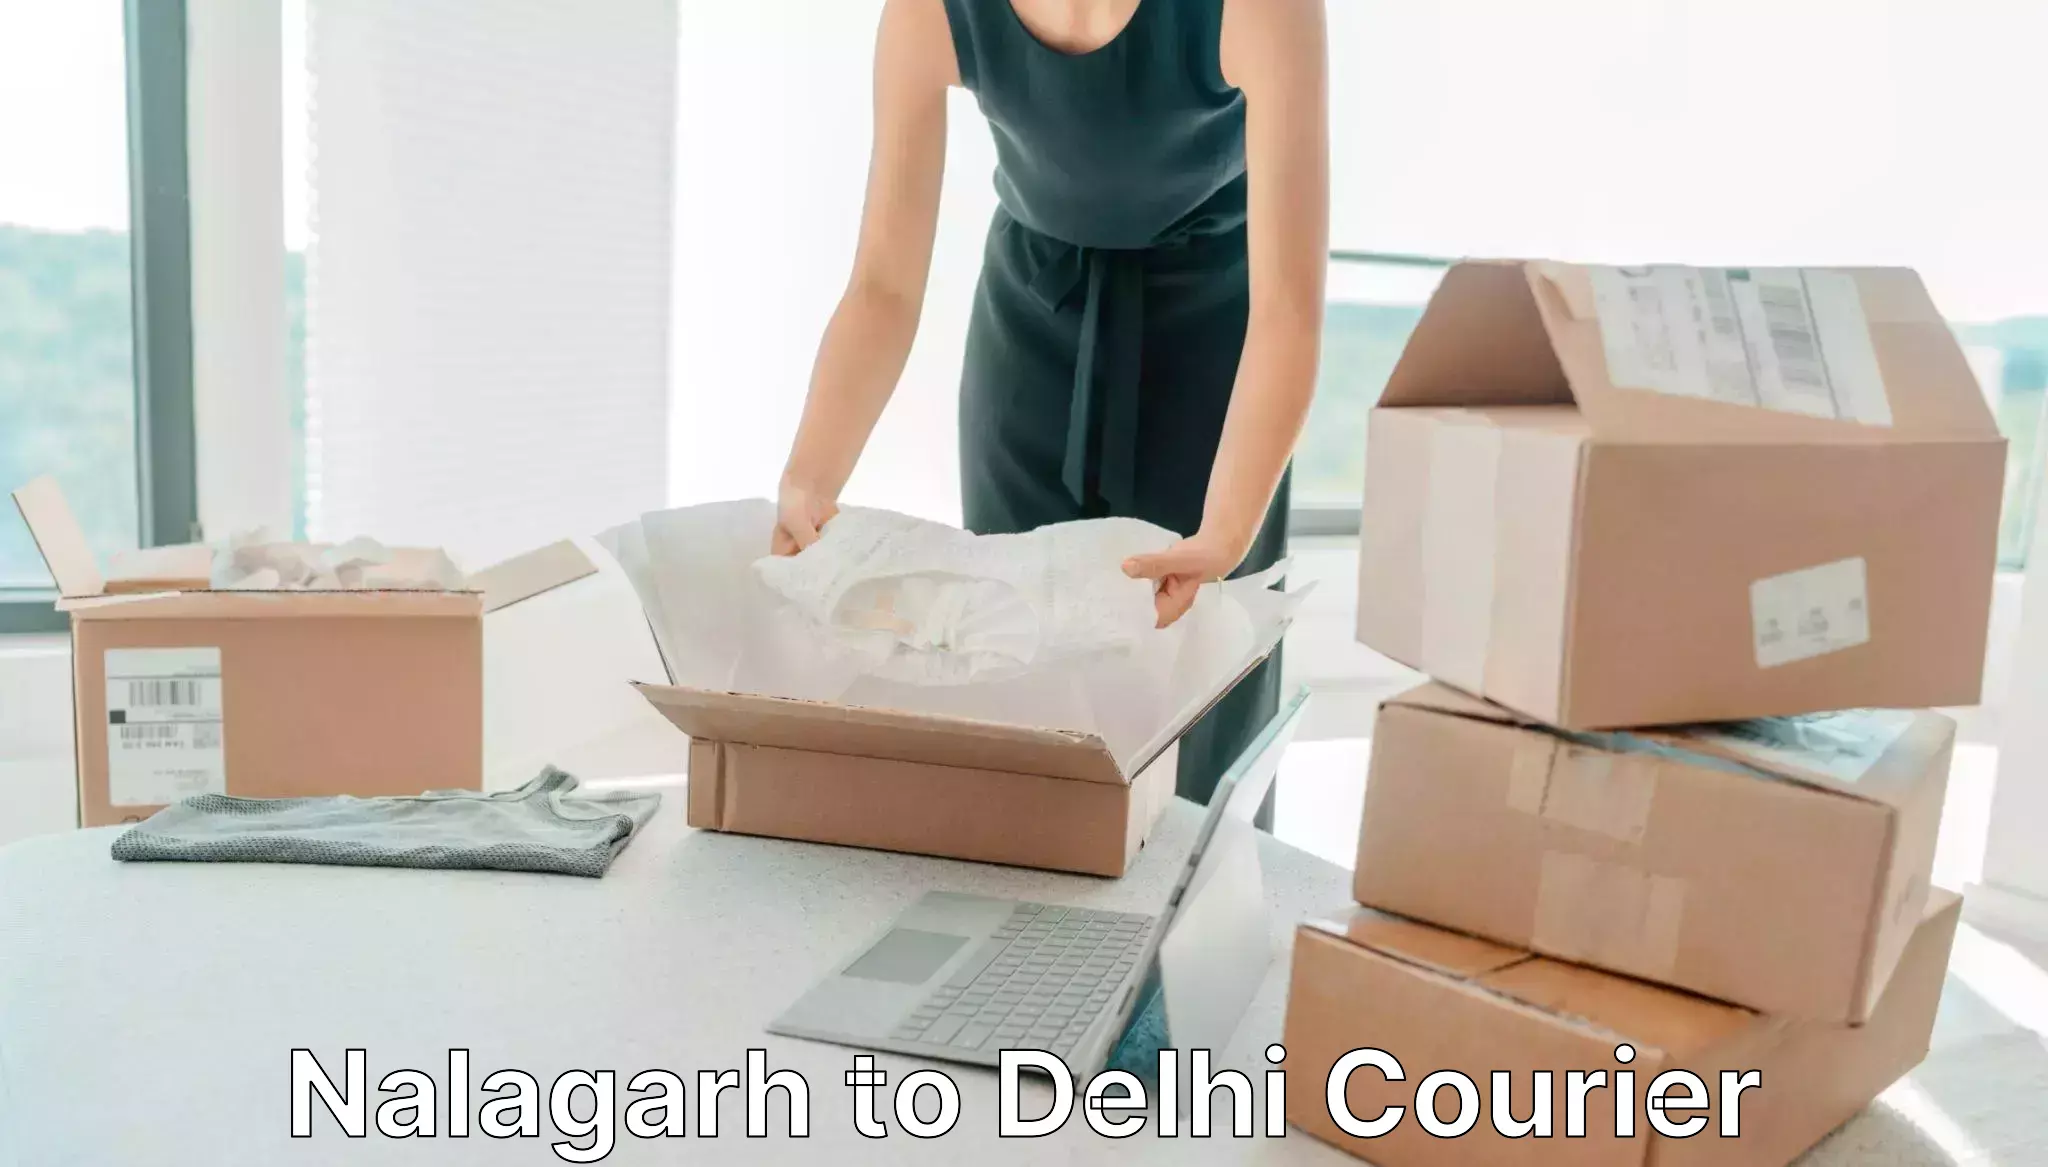 Cash on delivery service Nalagarh to Jhilmil